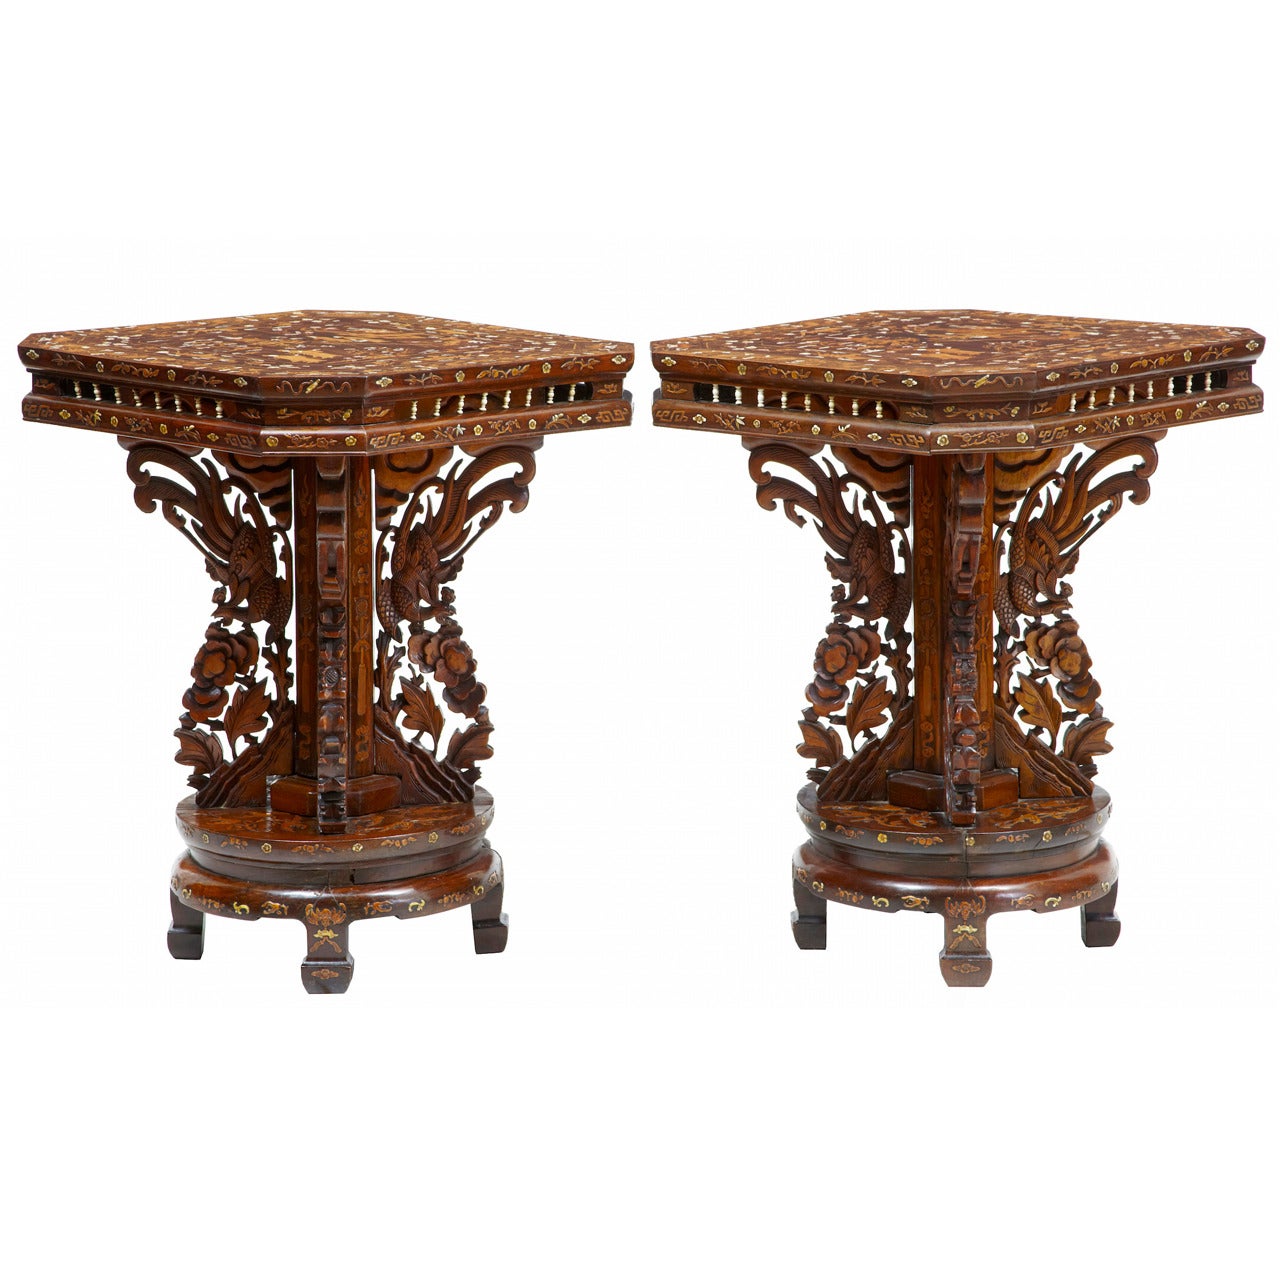 Pair of 19th Century Chinese Hardwood Inlaid Occasional Tables